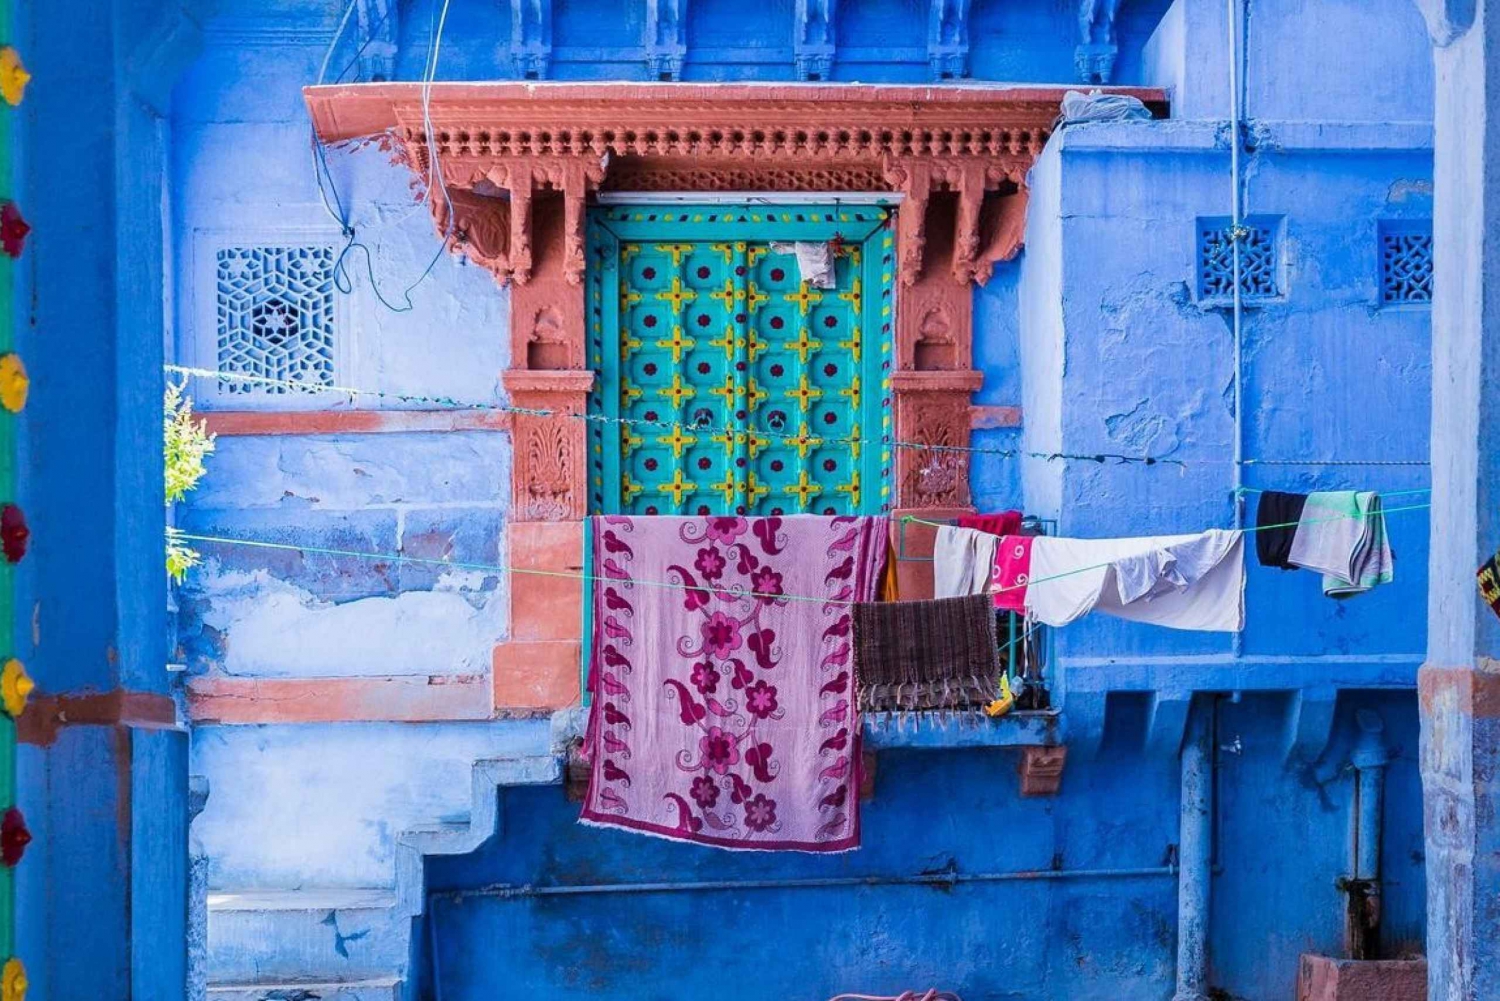 Jodhpur Blue City Tour with Hotel Pickup and Drop-off